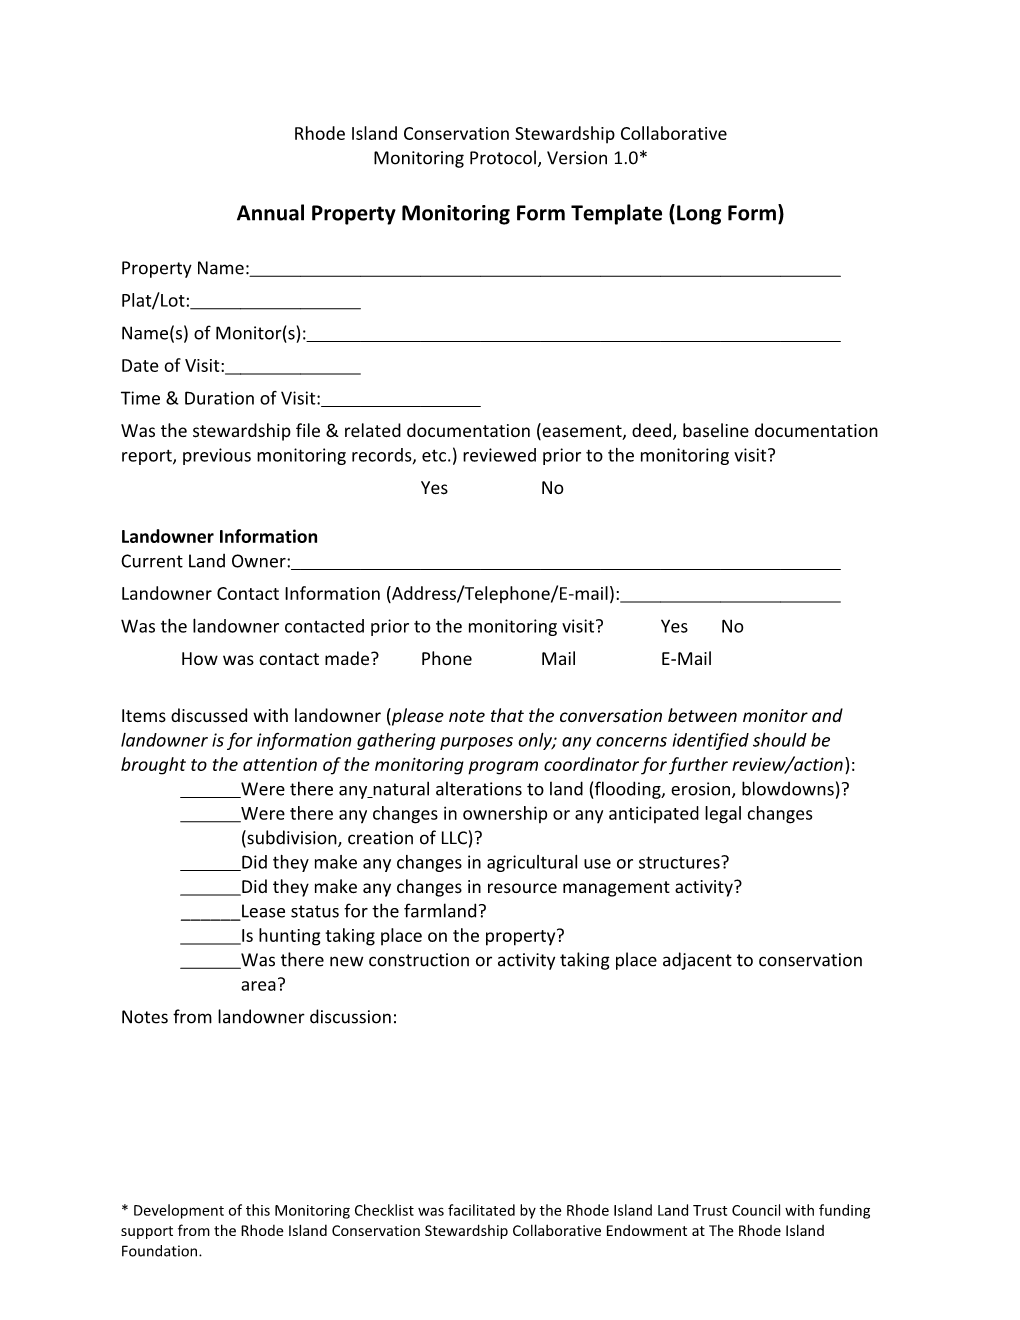 Annual Property Monitoring Form Template (Long Form)